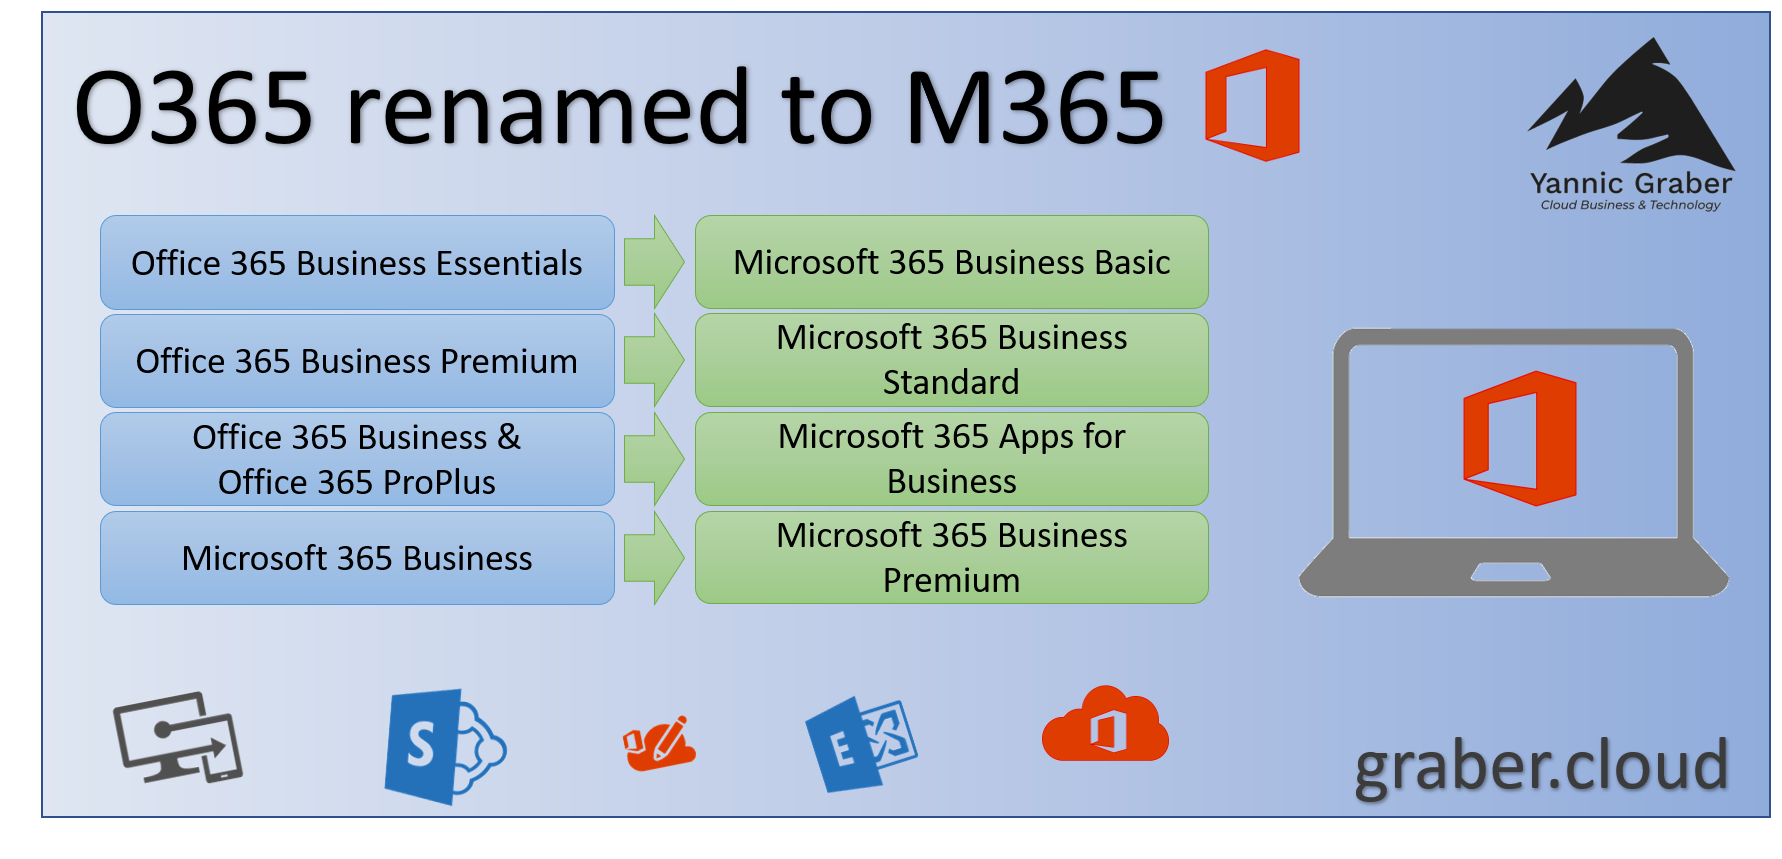 O365 renamed to M365